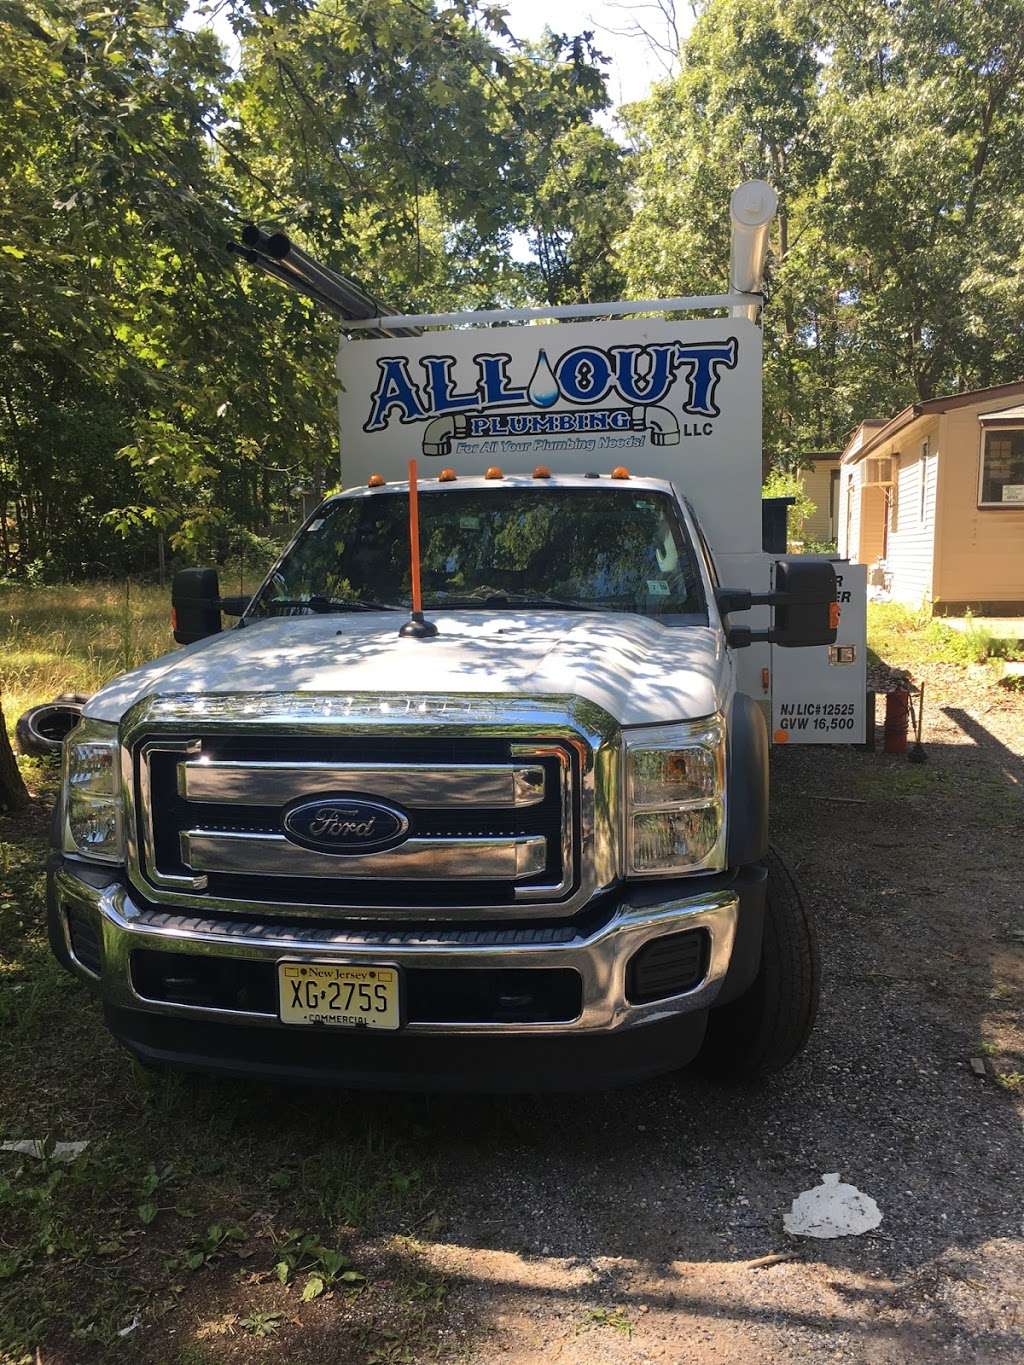 All Out Plumbing - plumber  | Photo 1 of 2 | Address: 625 Center Ave, Chesilhurst, NJ 08089, USA | Phone: (856) 745-3062